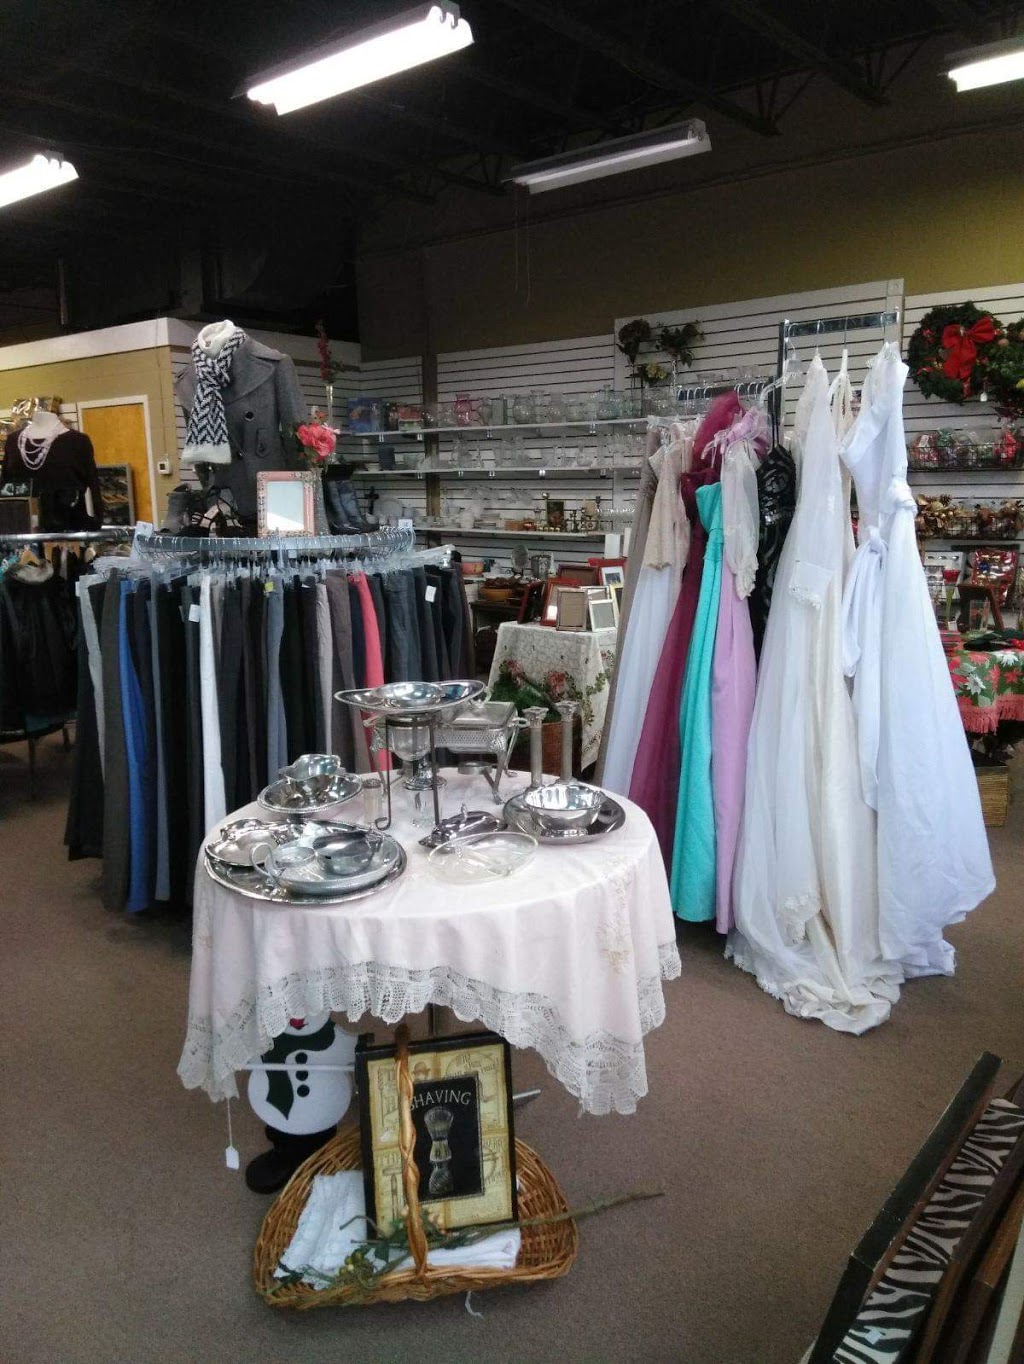 Help4People Thift Store | 17517 Redland Rd, Rockville, MD 20855 | Phone: (301) 330-4844